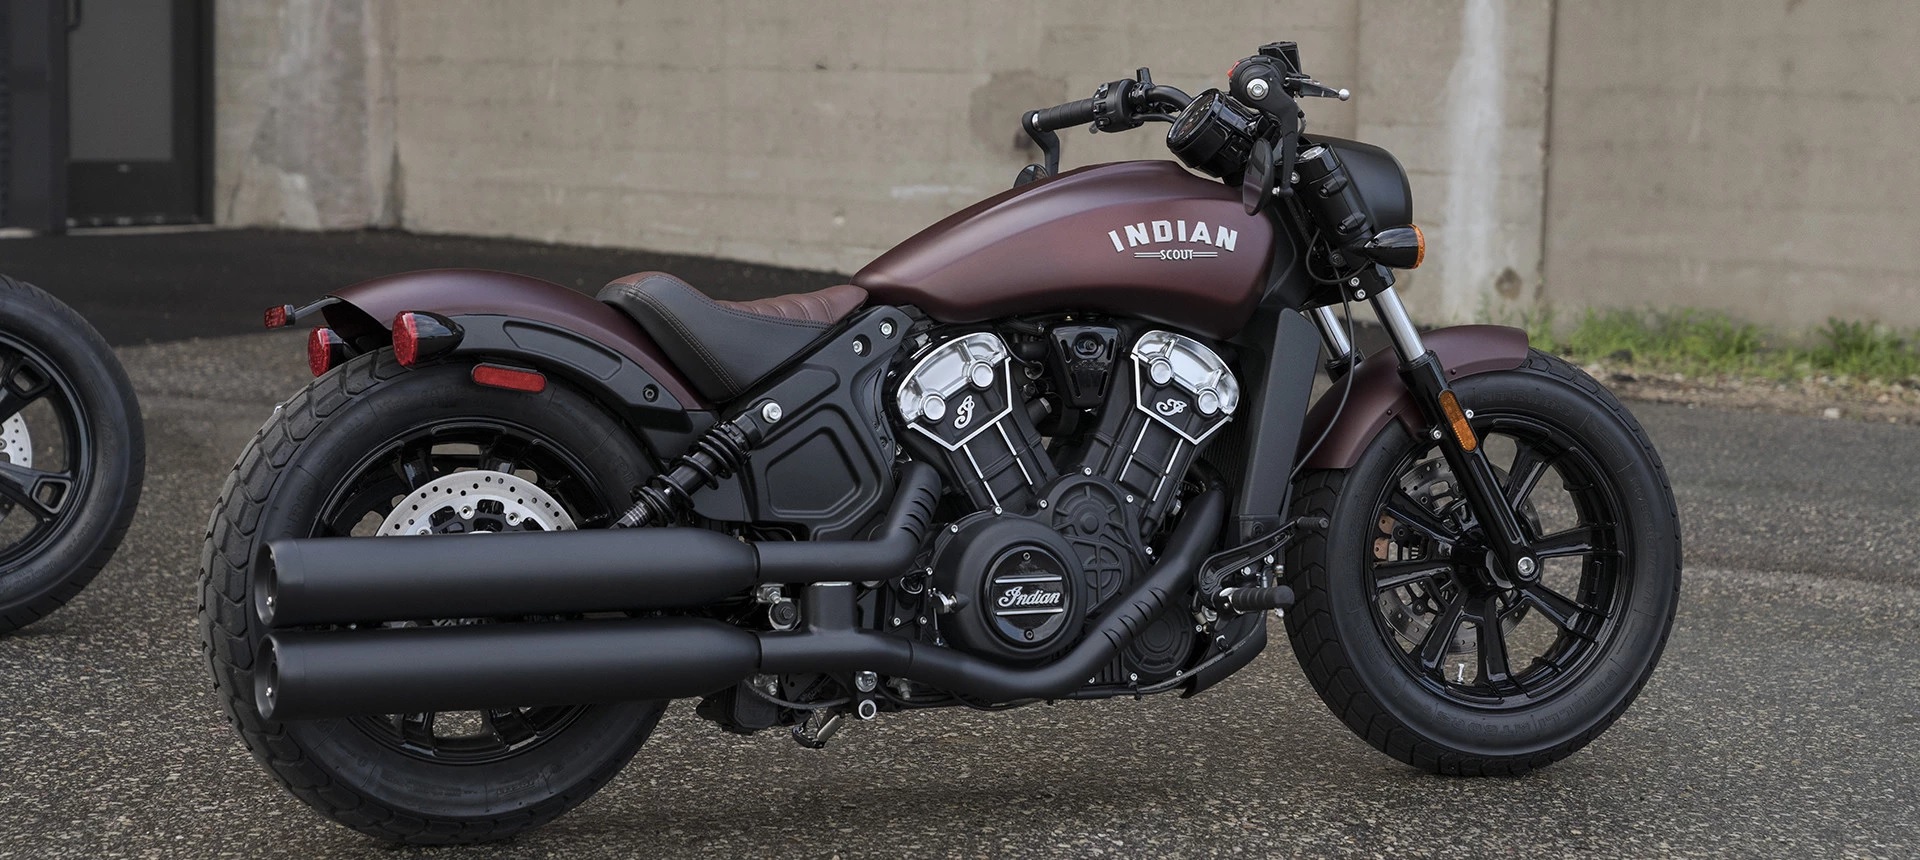 2021 Indian Scout Bobber Specs Features Photos Wbw Images and Photos